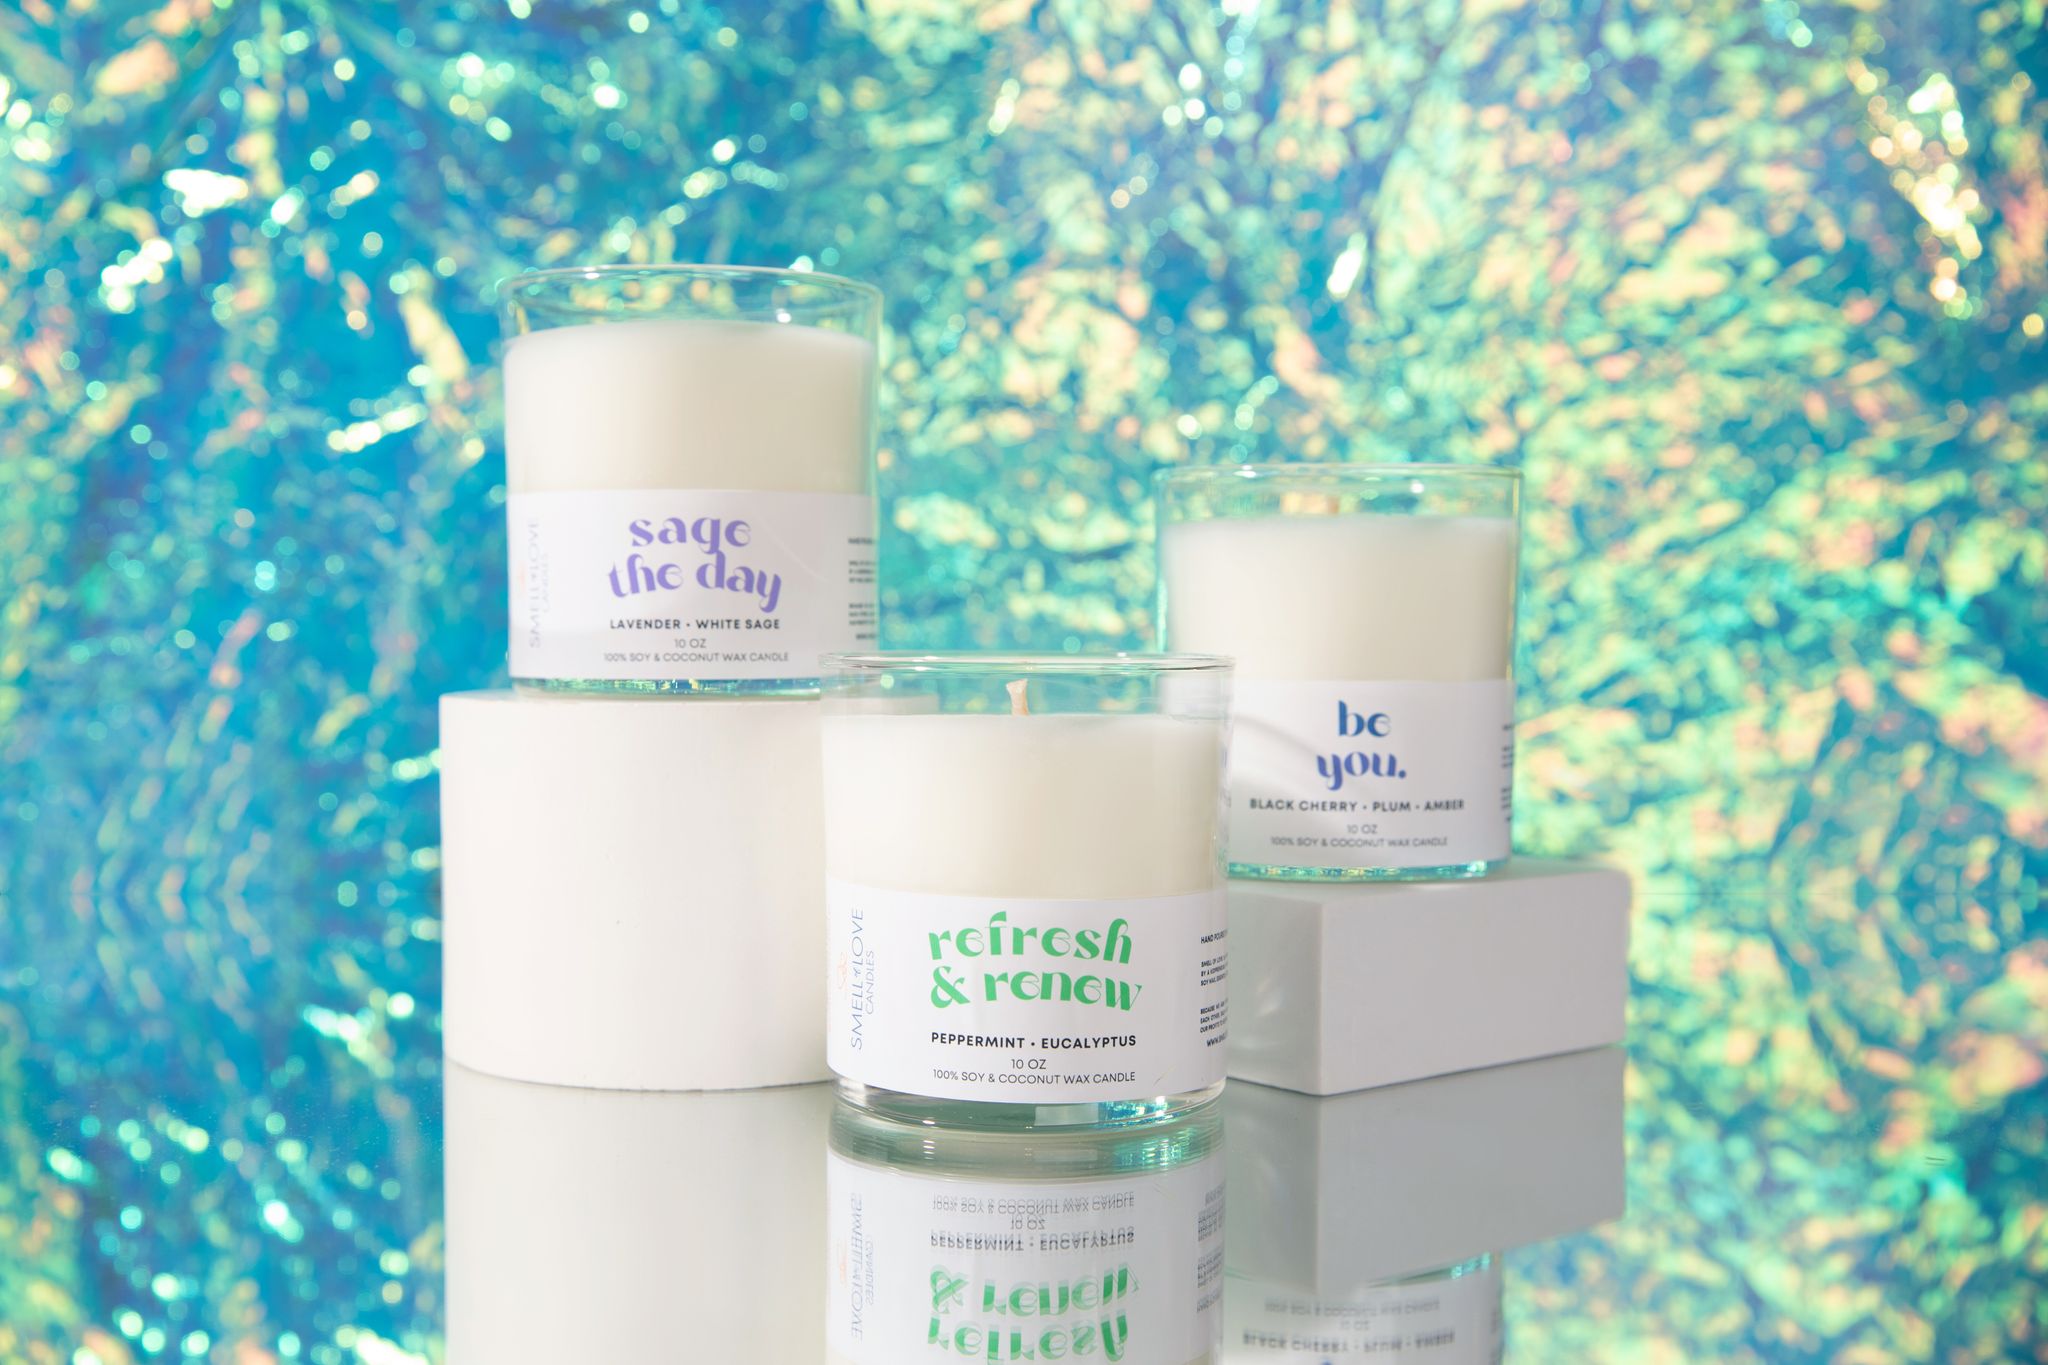 Illuminating Insights: Decoding the Meaning of White Soy Wax Candles